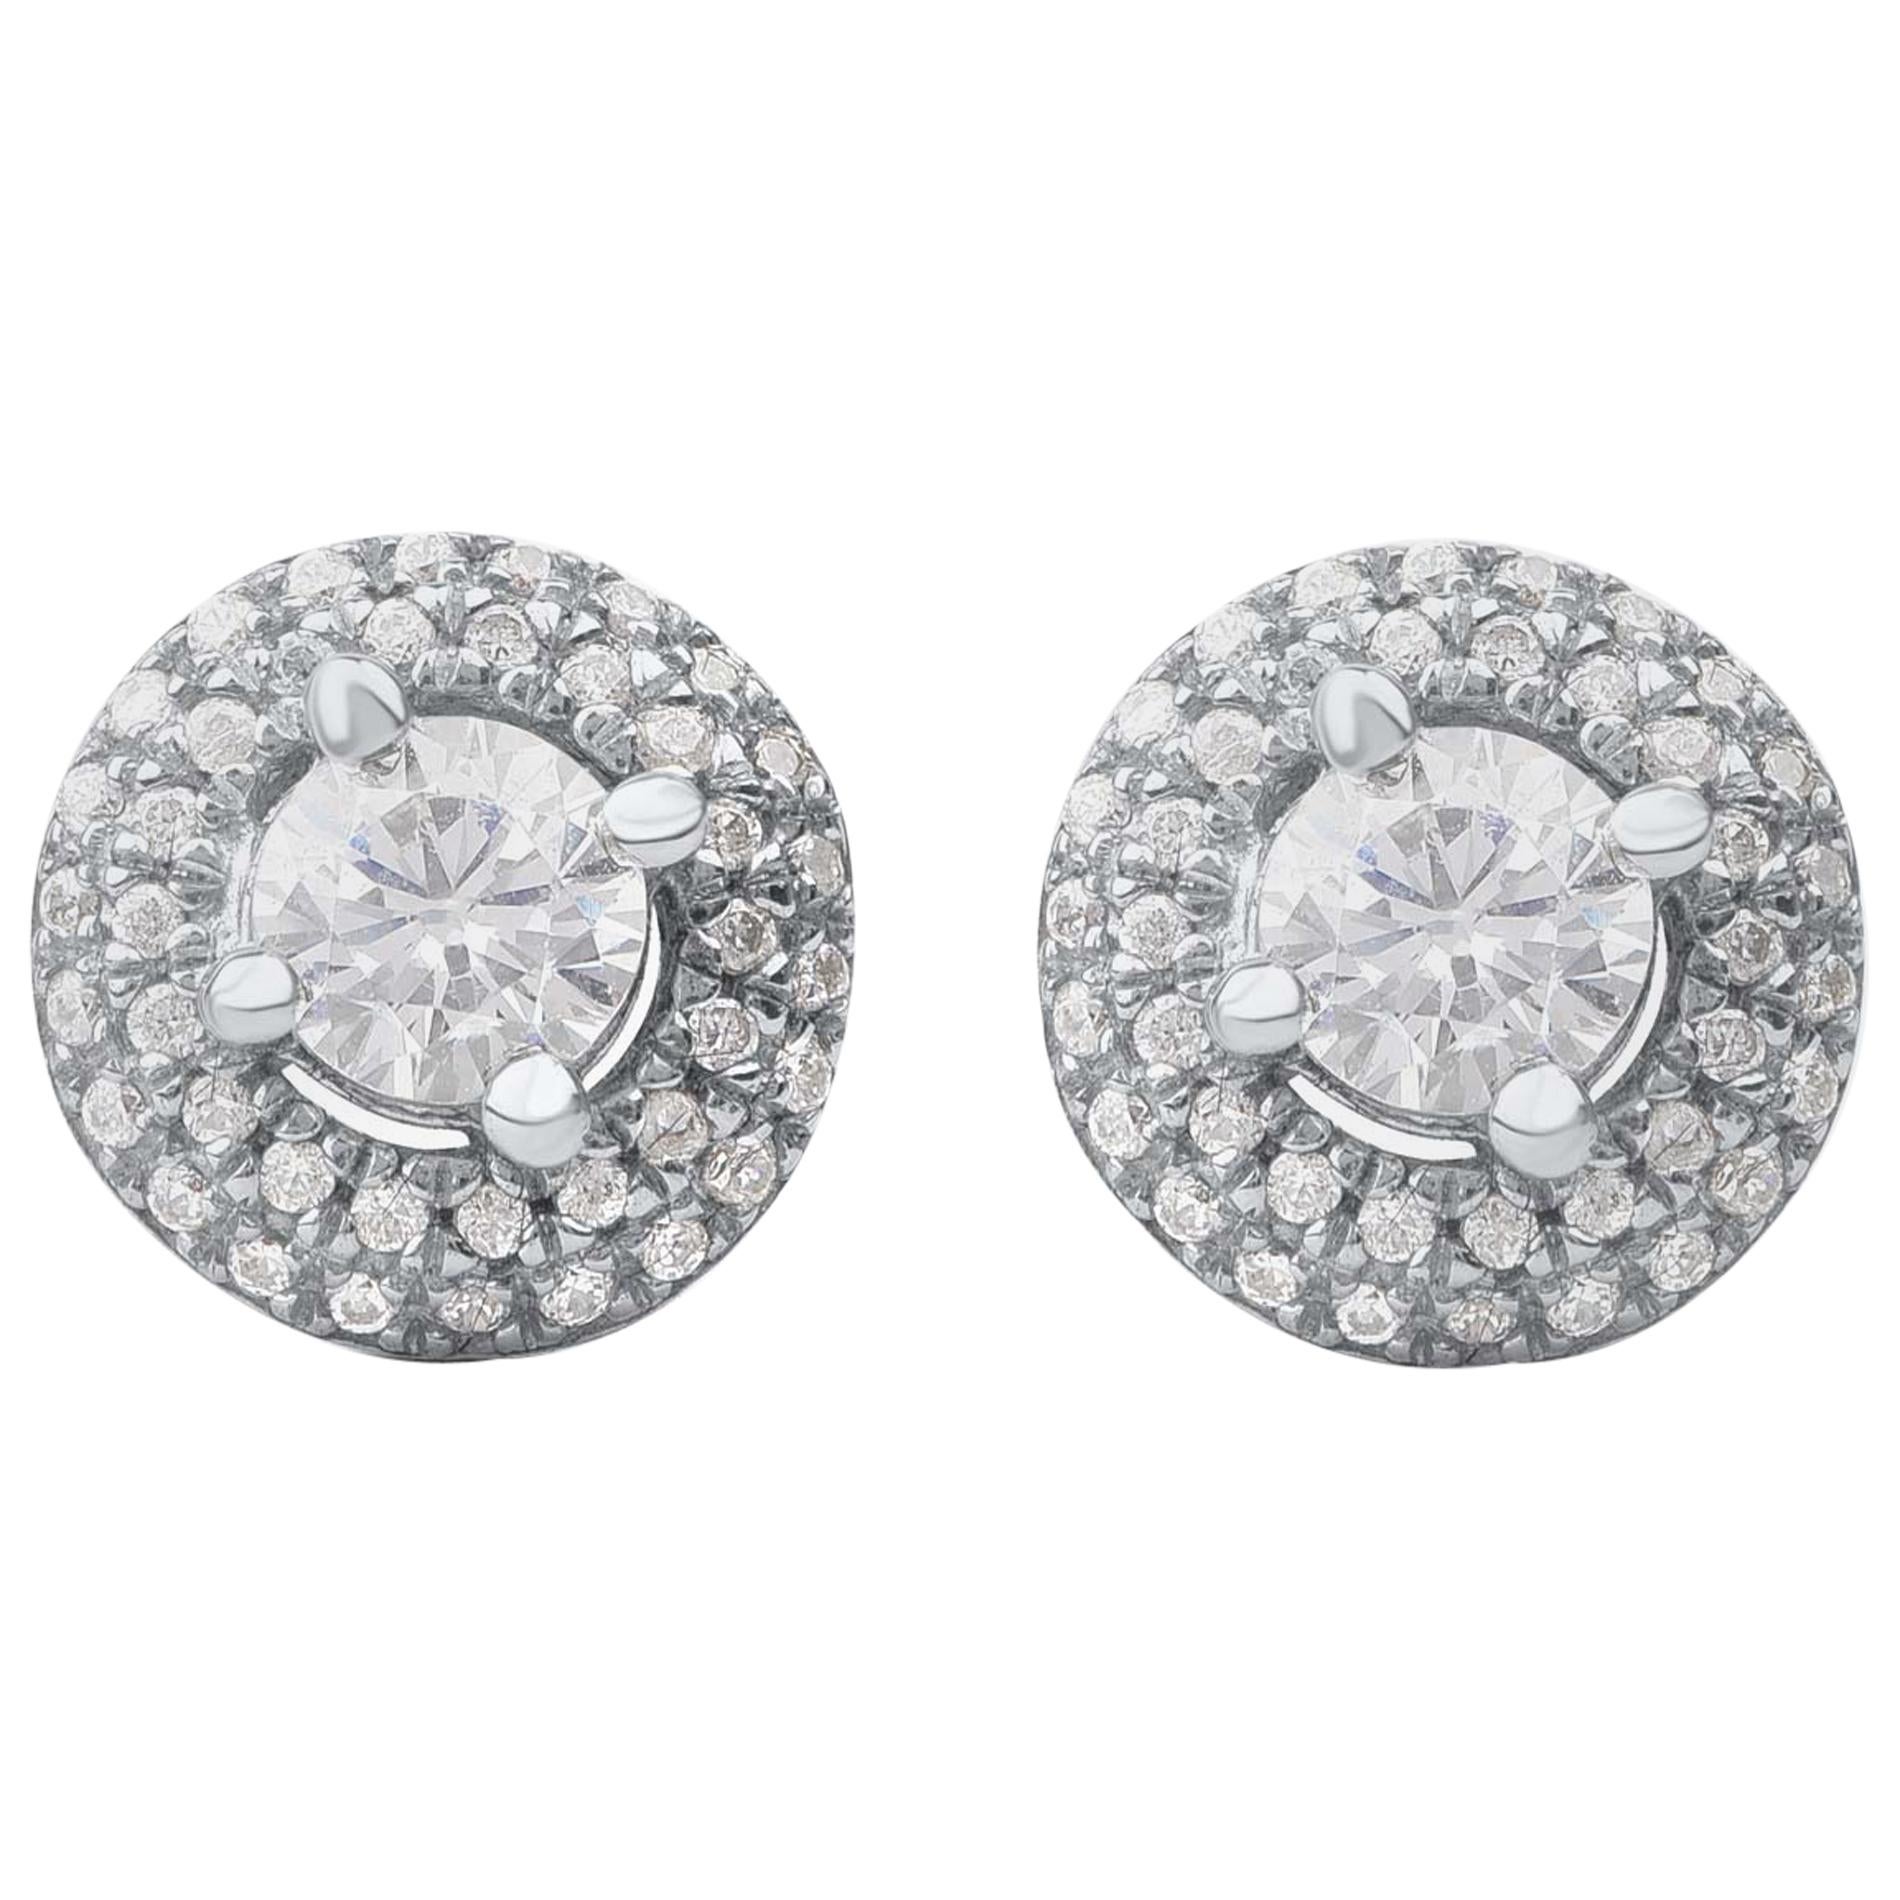 TJD 0.50 Carat Natural Diamond 18 Karat White Gold Dazzling Double Halo Earrings For Sale